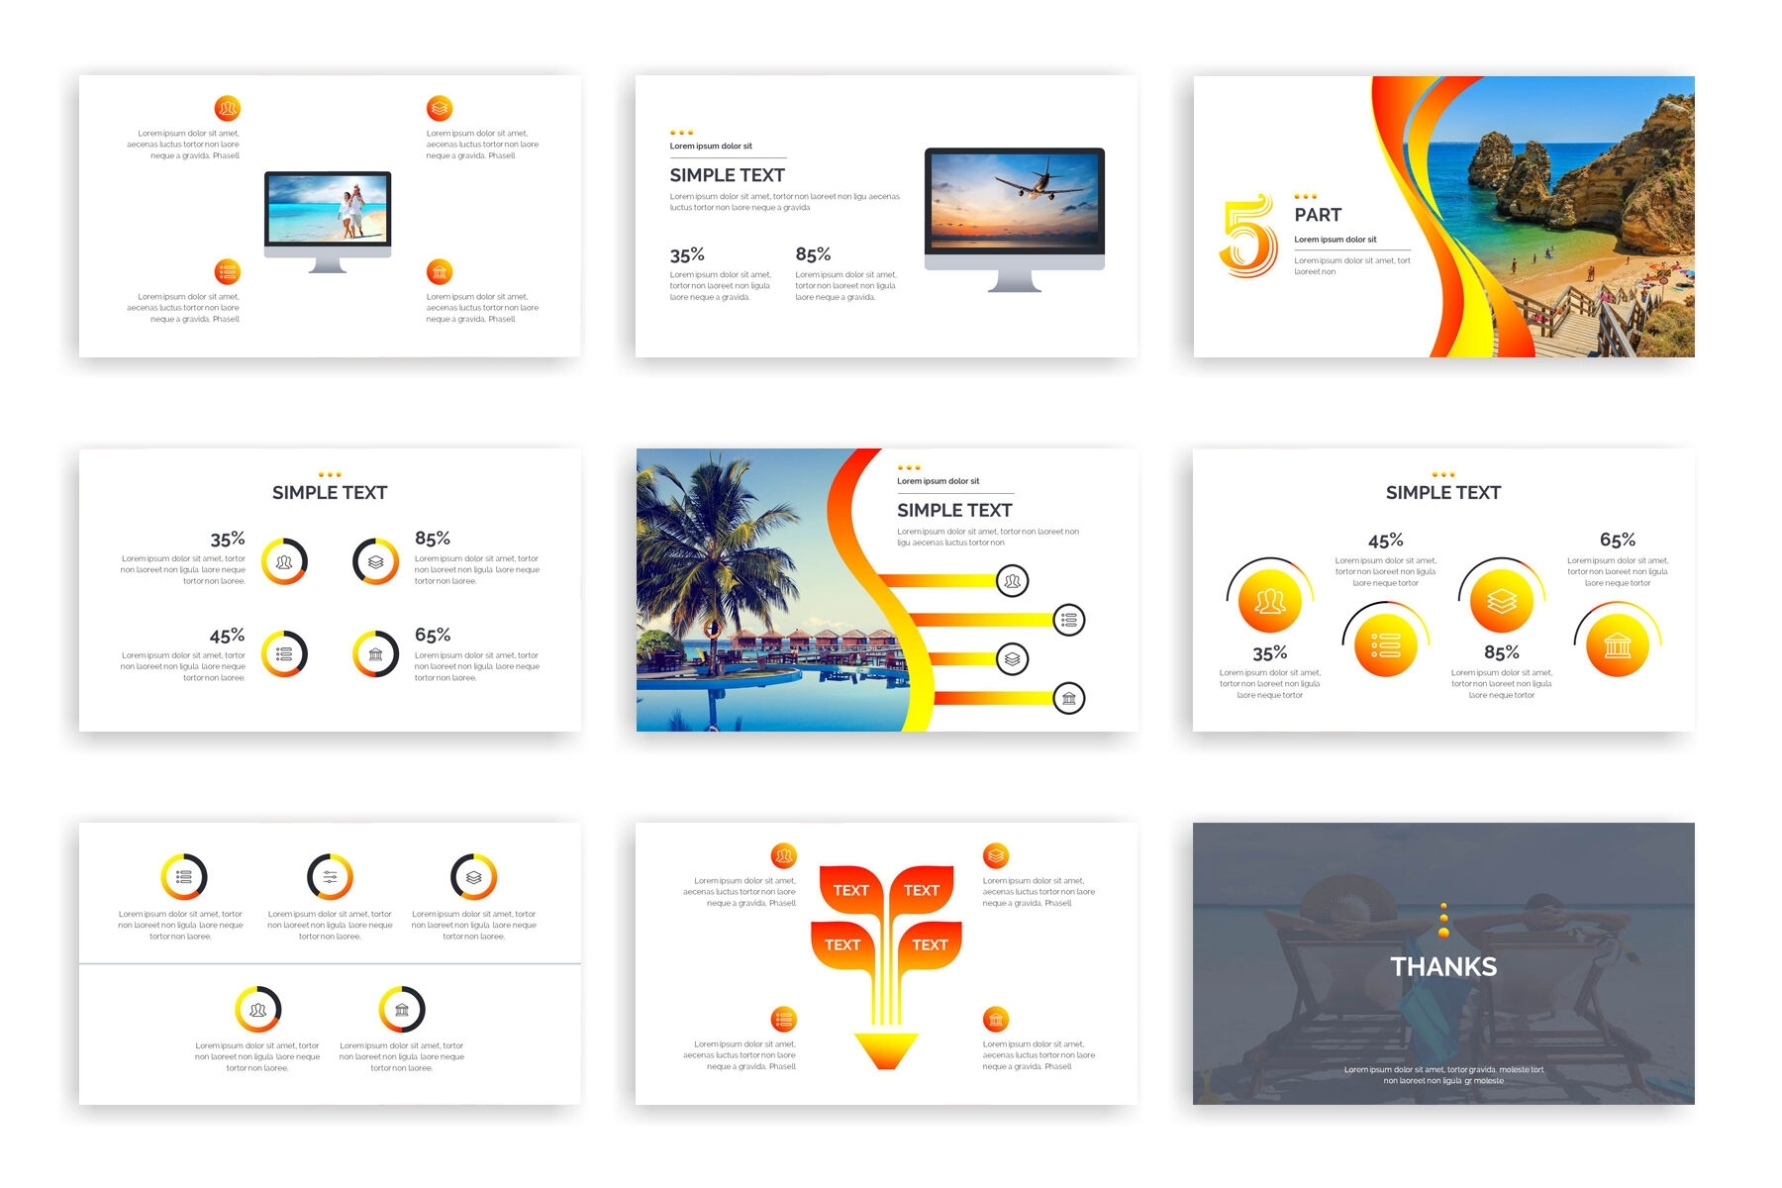 Business Idea Powerpoint Presentation By Thestyle | Thehungryjpeg Throughout Ppt Presentation Templates For Business